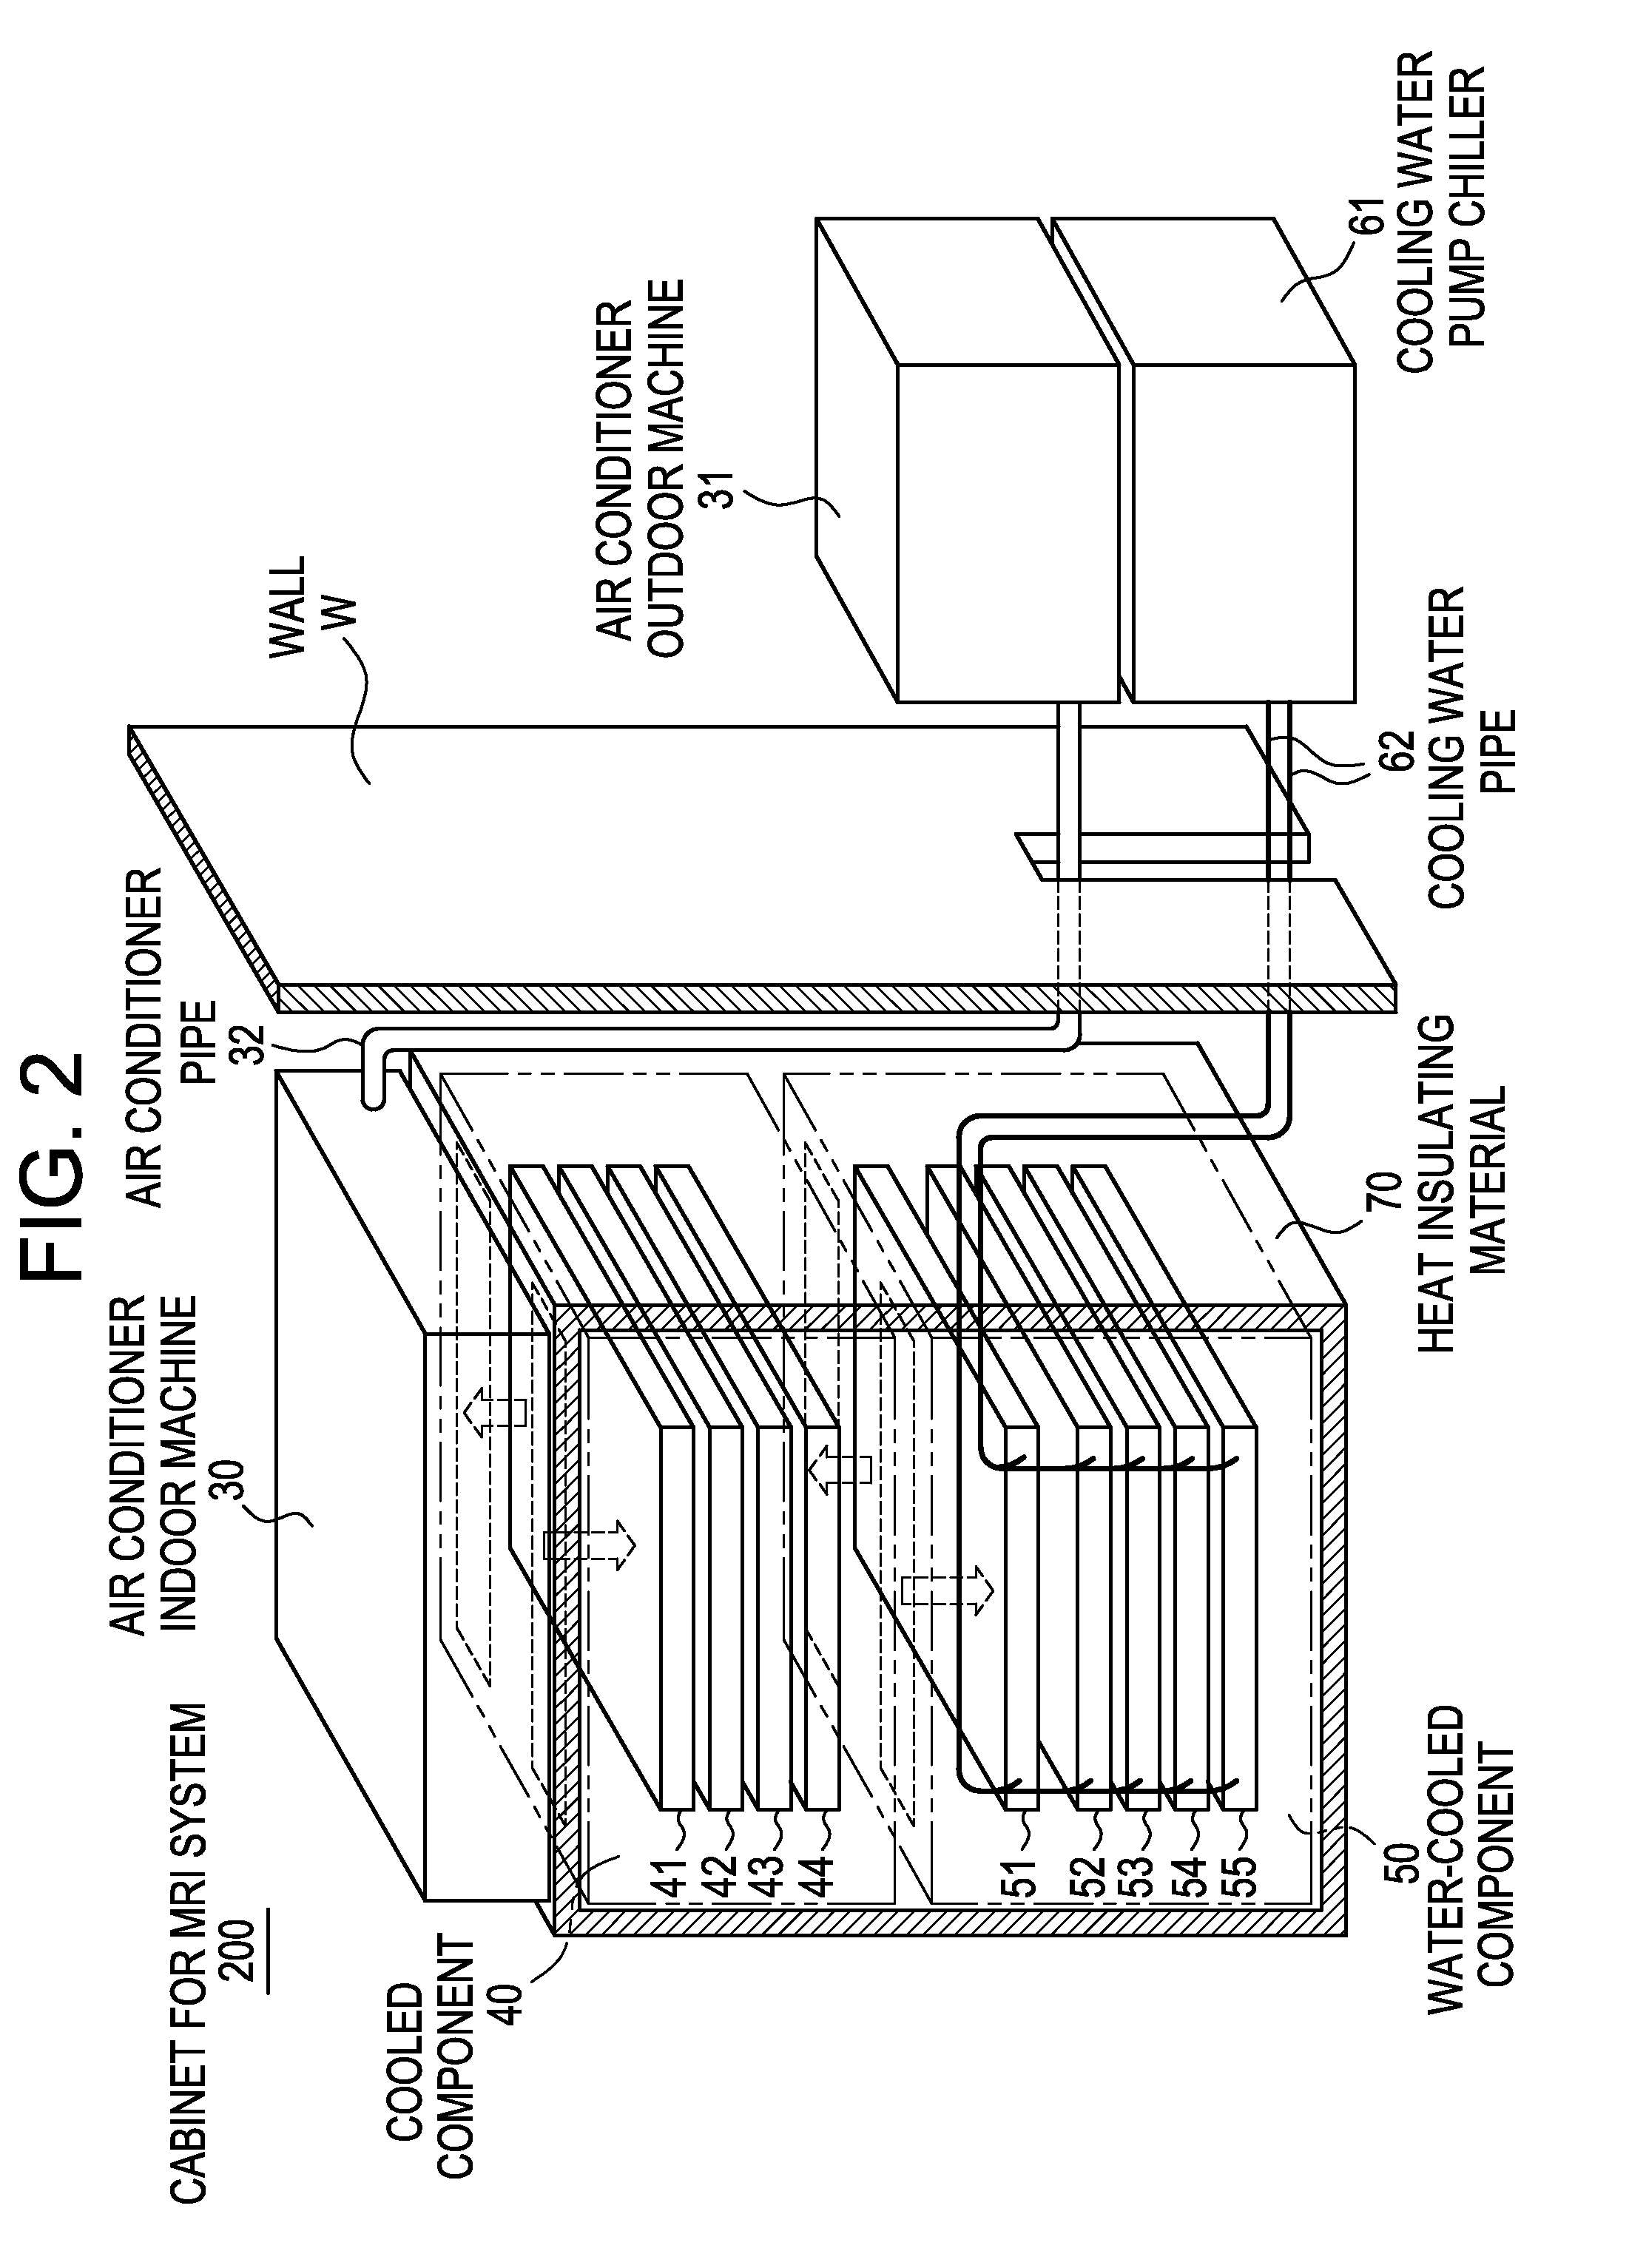 Cabinet for MRI system